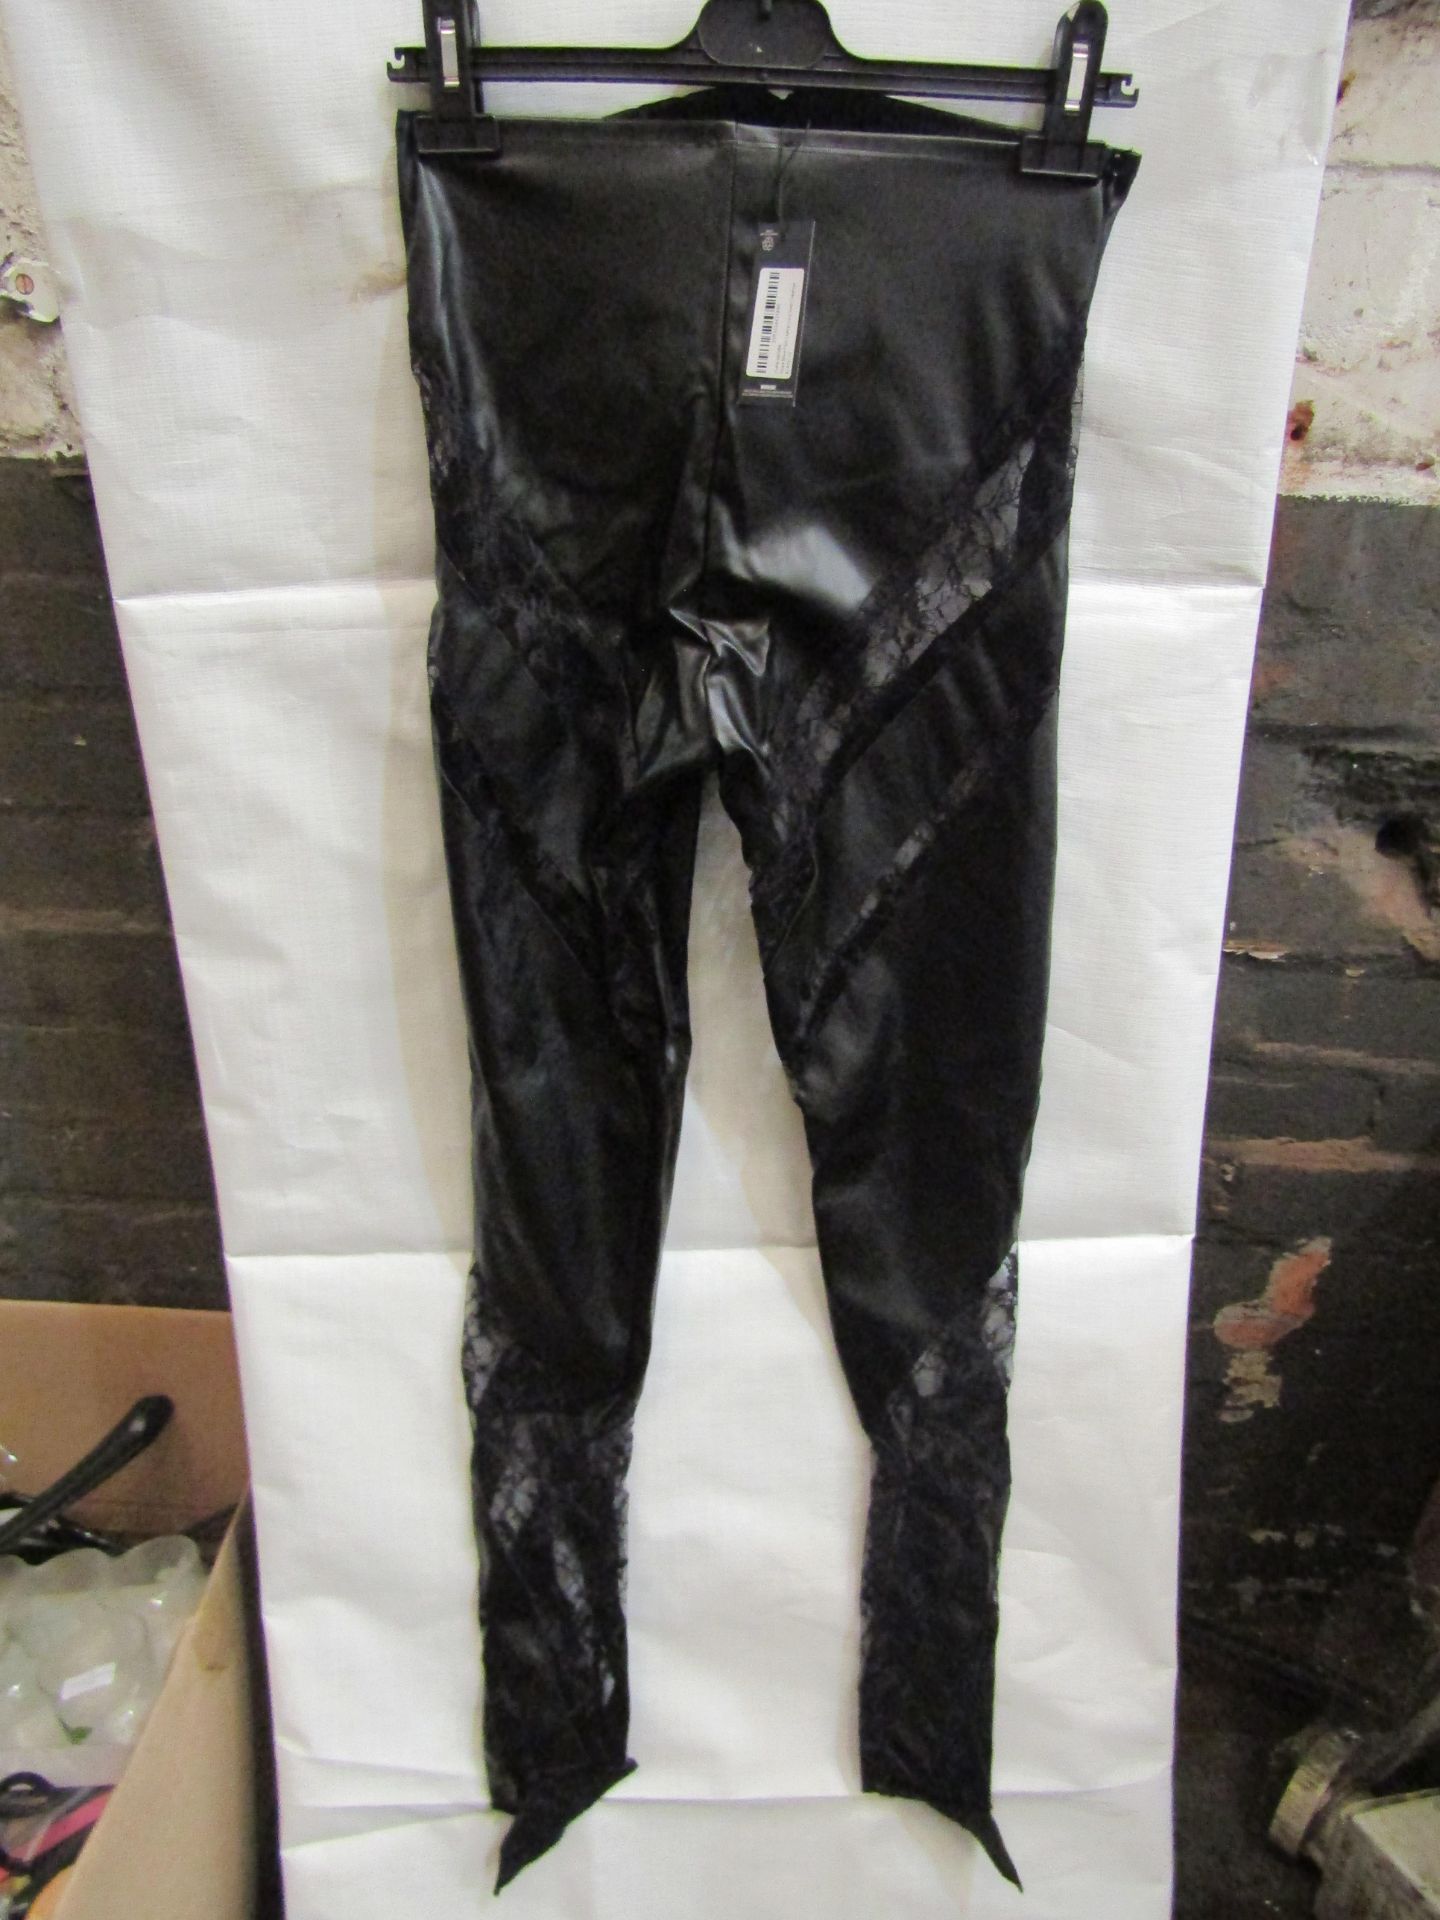 4x PrettyLittleThing Shape Black Faux Leather Insert Leggings, Size: 8 - New & Packaged.